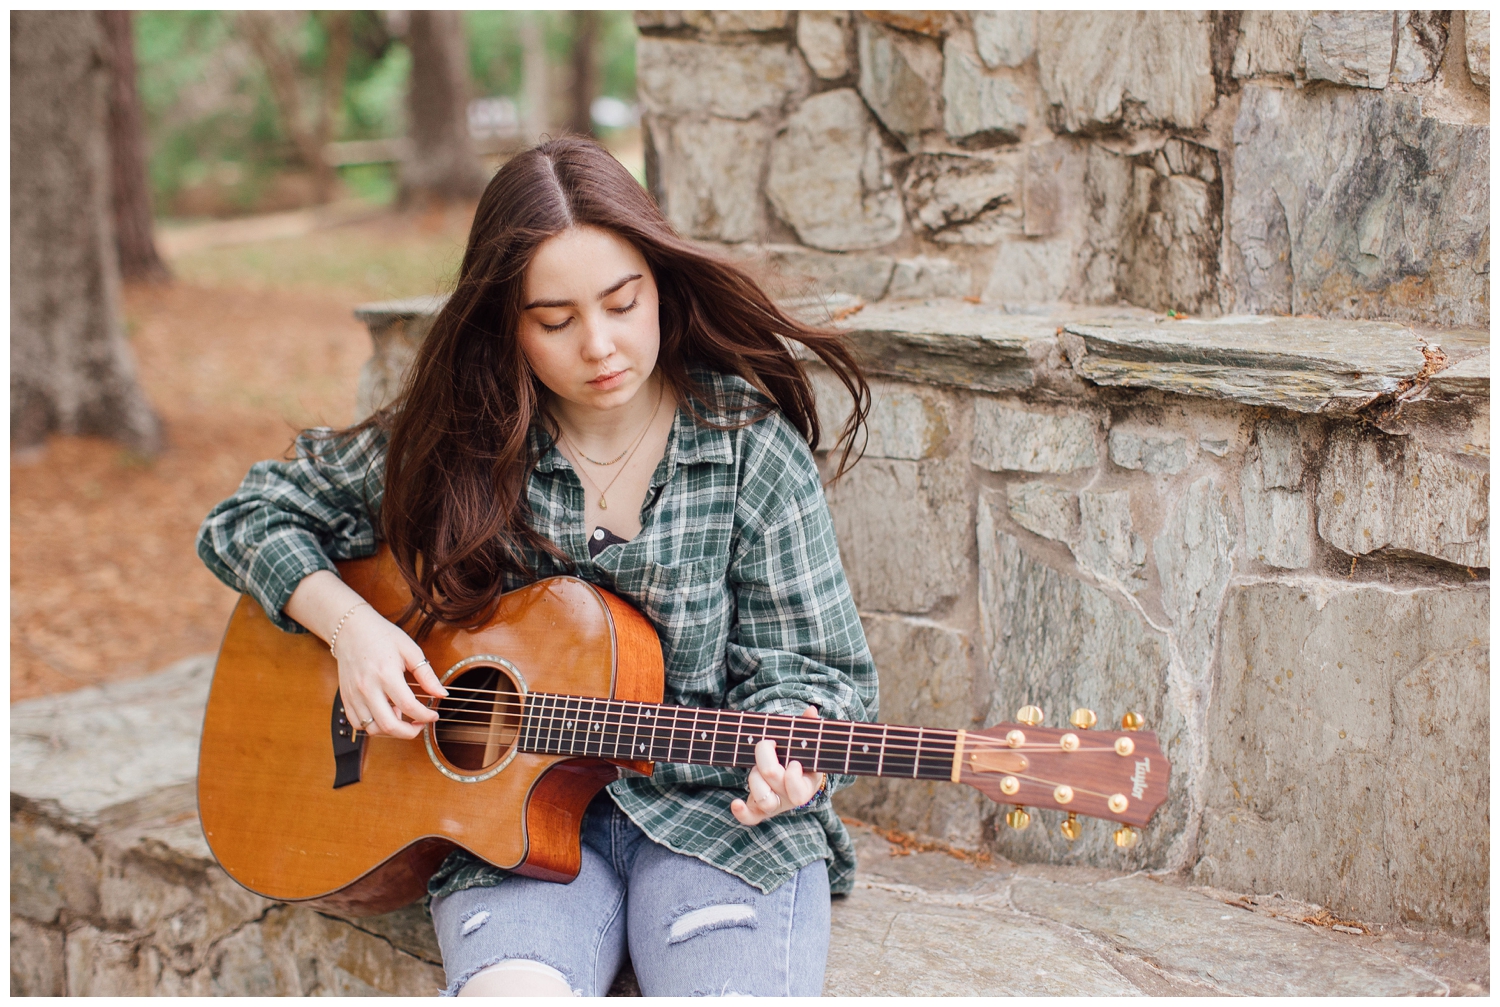 Houston senior photos with guitar in girls hand sitting on stone bench